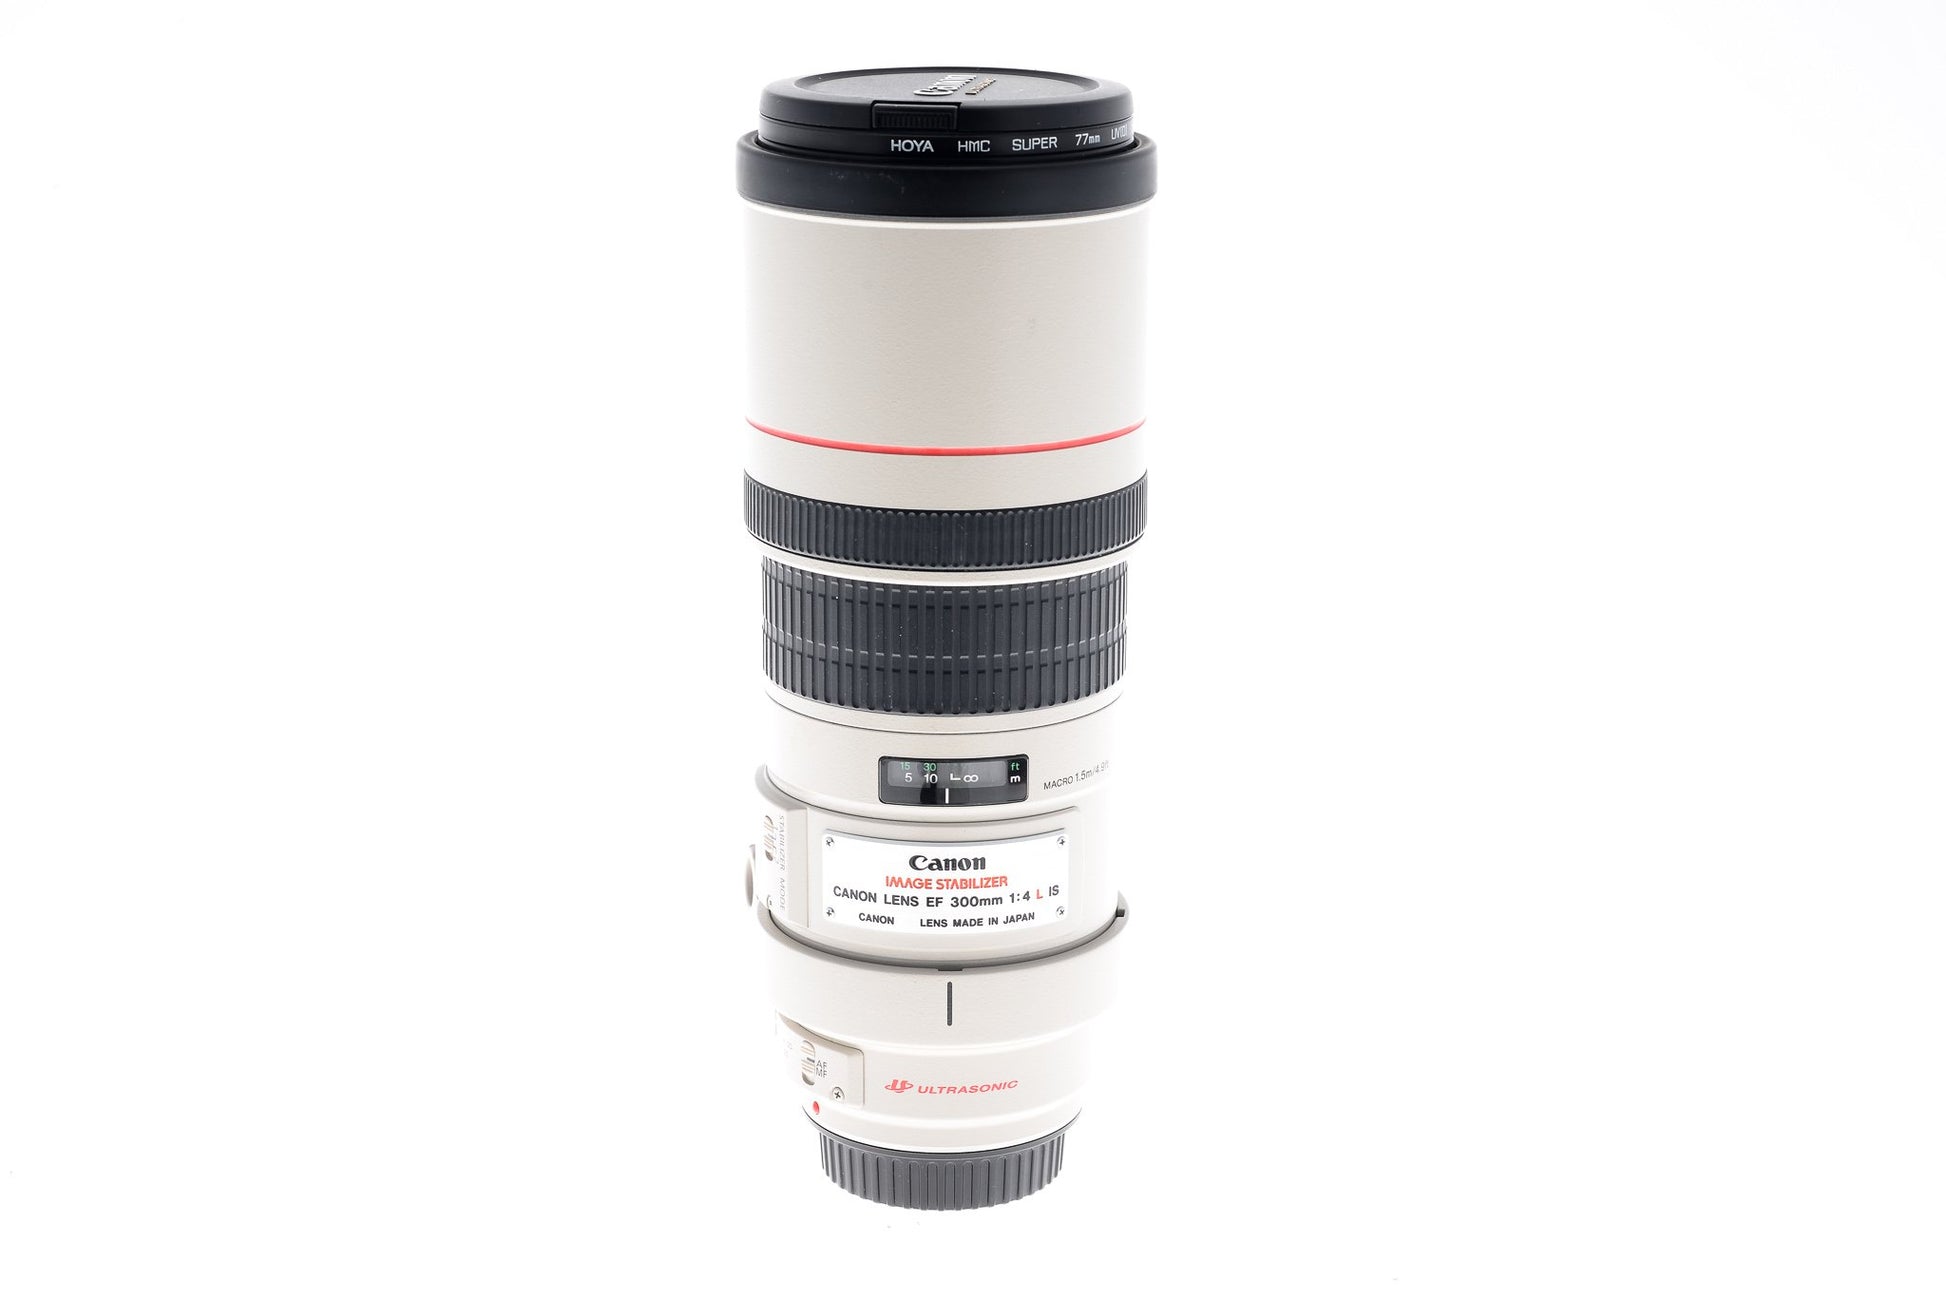 Canon 300mm f4 L IS USM - Lens